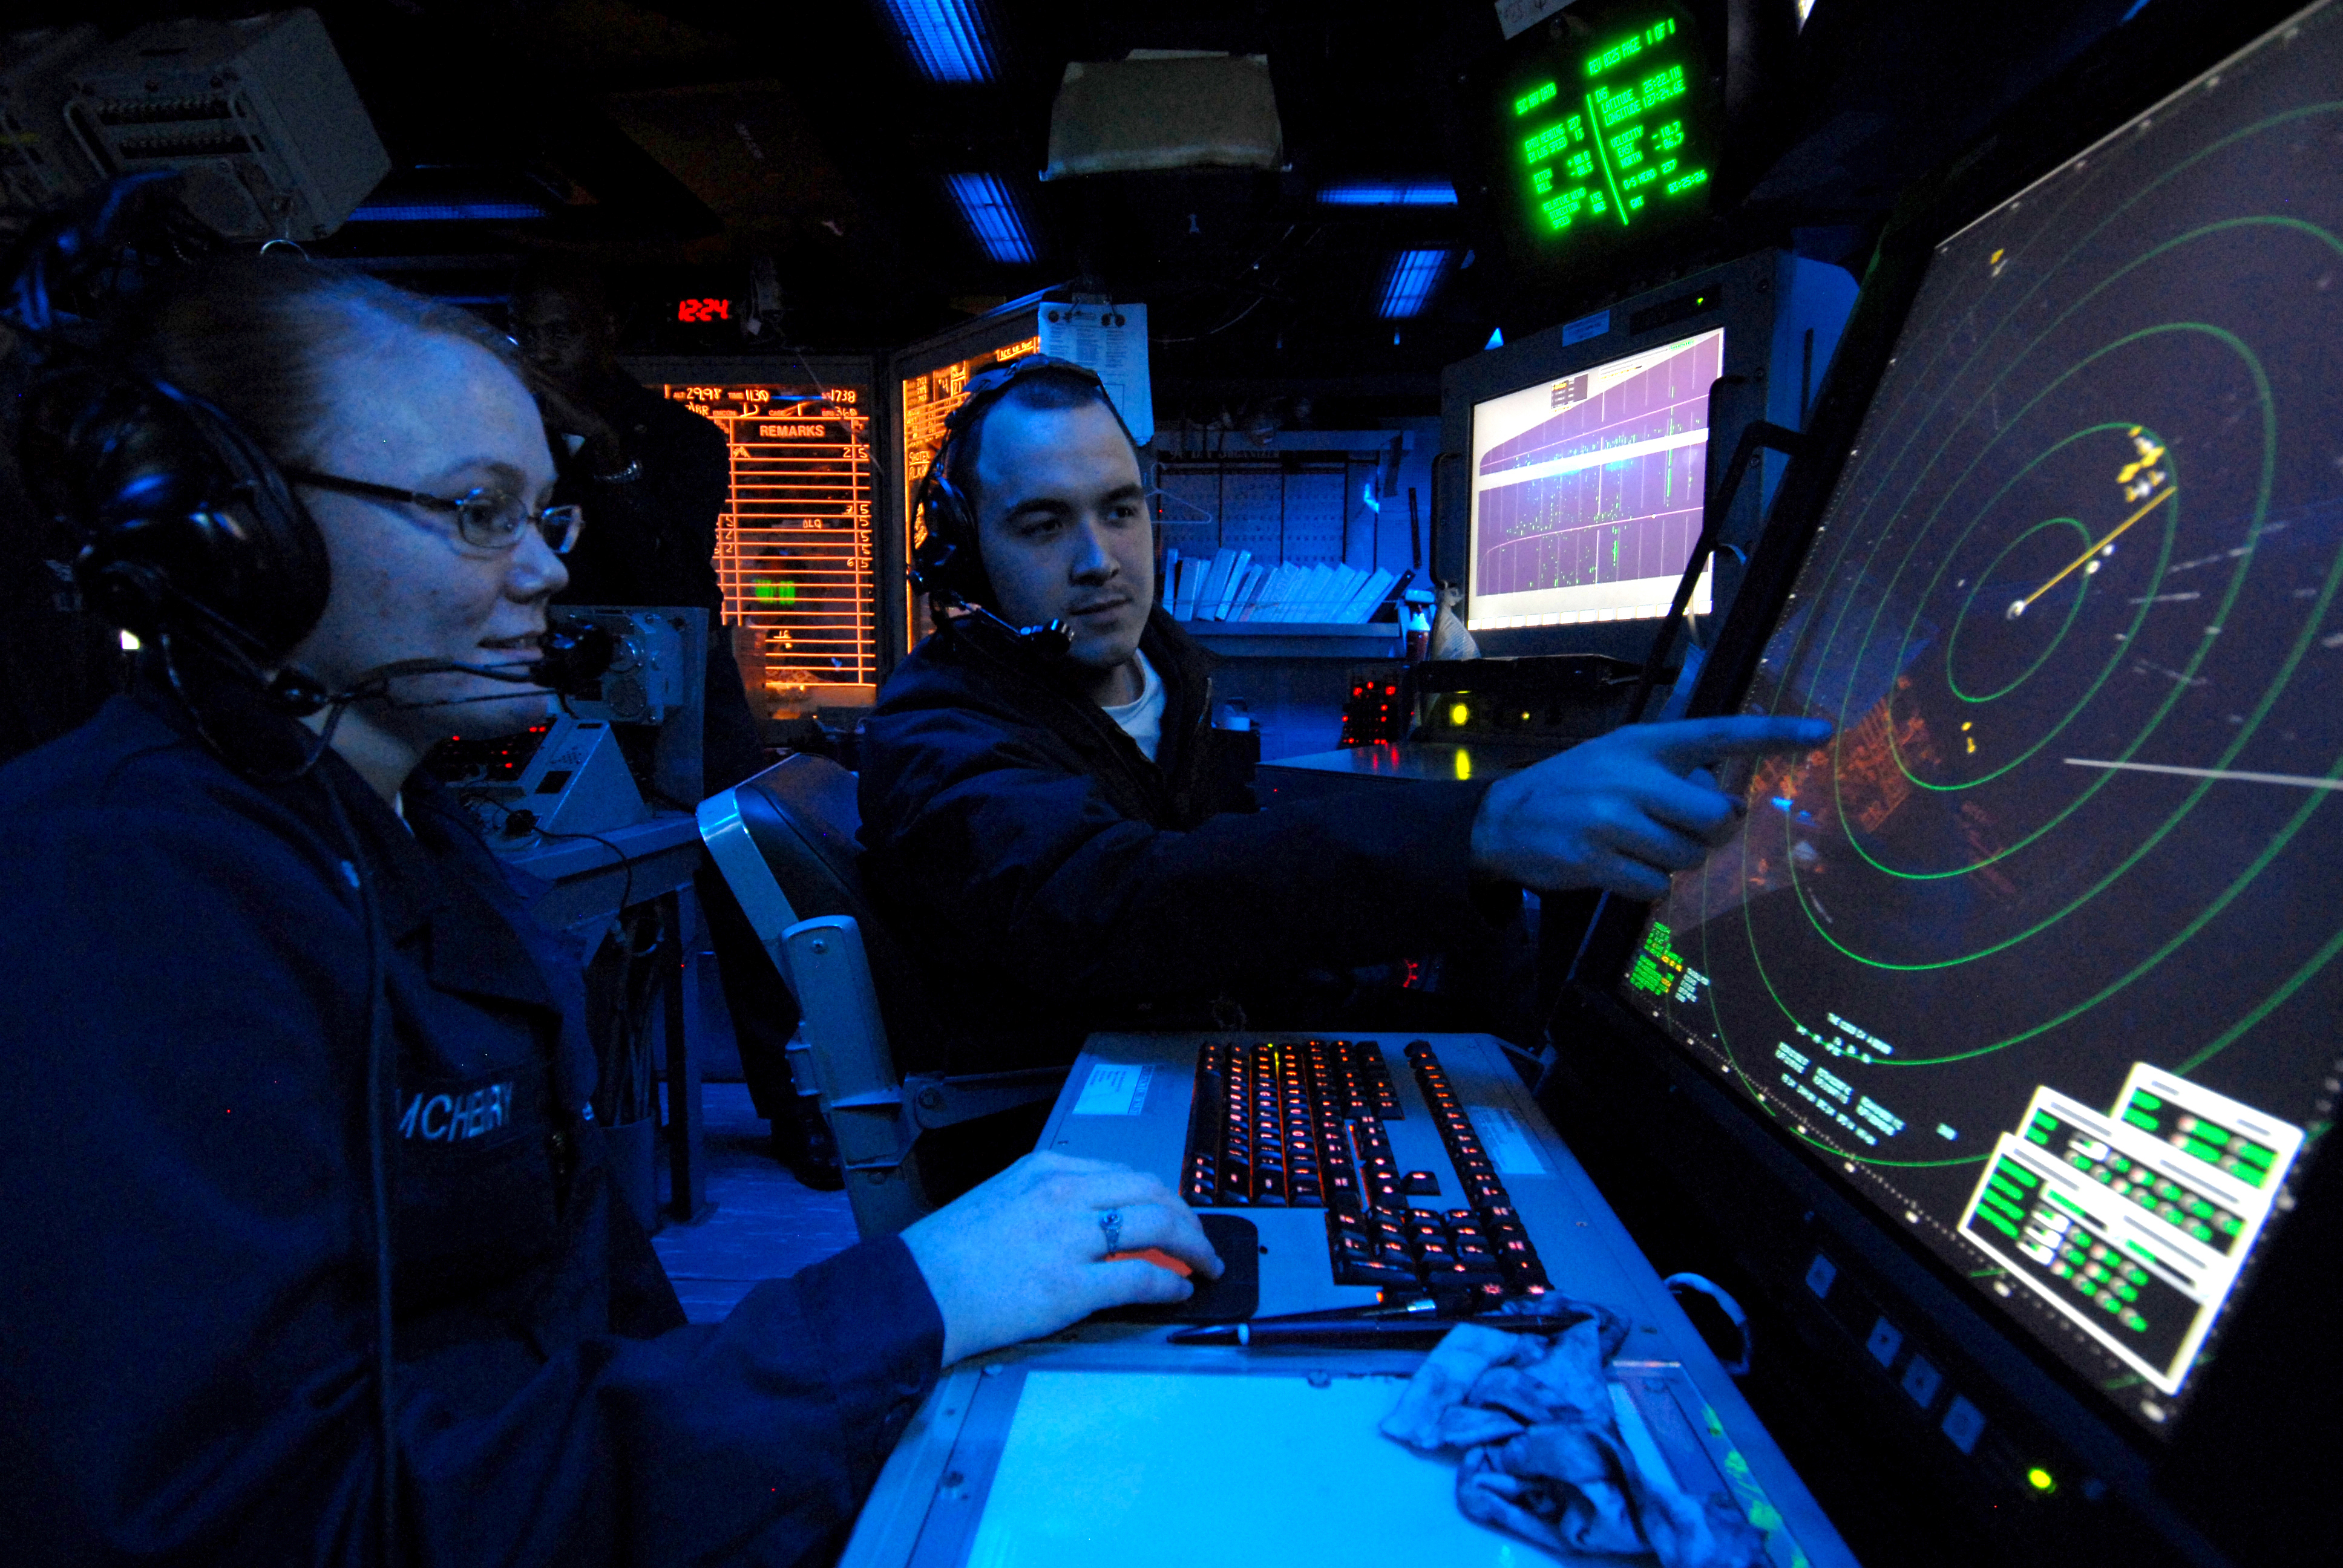 081117-N-9950J-004 EAST CHINA SEA (Nov. 17, 2008) Air Traffic Controller 2nd Class Erin McHenry, of Wichita, Kan., and Air Traffic Controller Airman Apprentice Adam Minkel, of Pipestone, Minn., track aircraft on a radar console in the amphibious air traffic control center aboard the forward-deployed amphibious assault ship USS Essex (LHD 2). Air-traffic controllers aboard Essex monitor all air traffic within a 220-mile radius. U.S. Navy photo by Mass Communication Specialist 2nd Class Greg Johnson (Released)